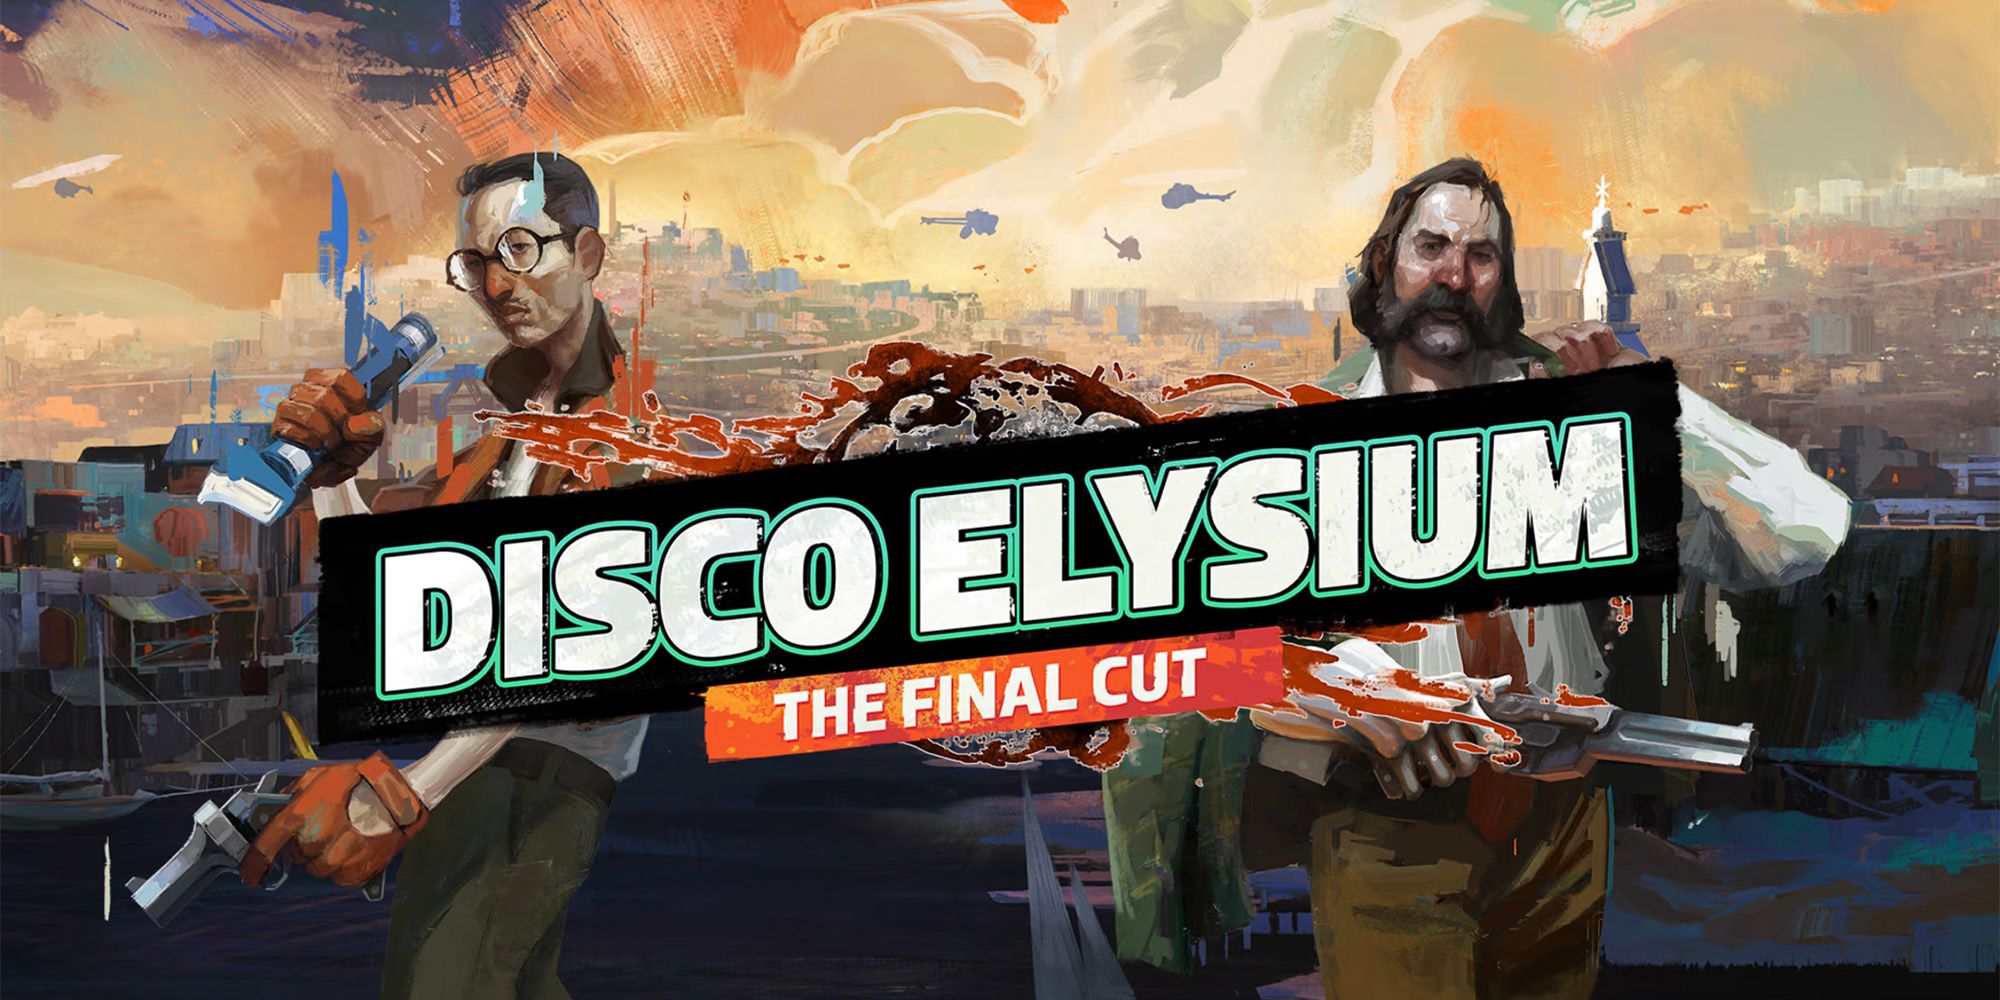 Disco Elysium- The Final Cut Collector’s Edition - Kim And Harry Standing By The Logo